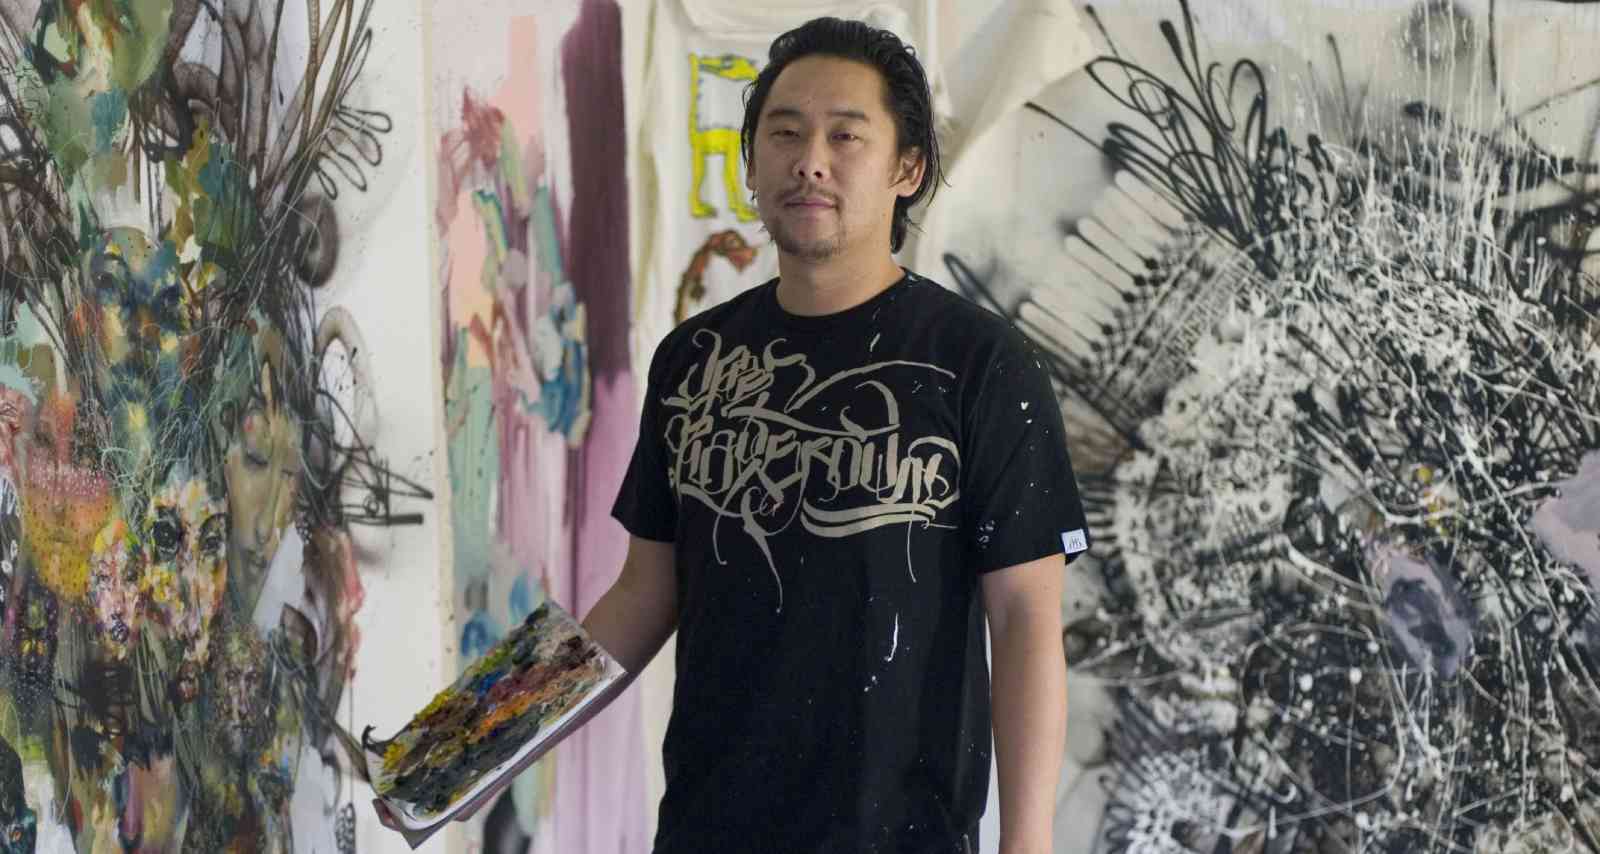 David Choe’s Net Worth: The Street Artist’s Facebook Story that Made Him Rich